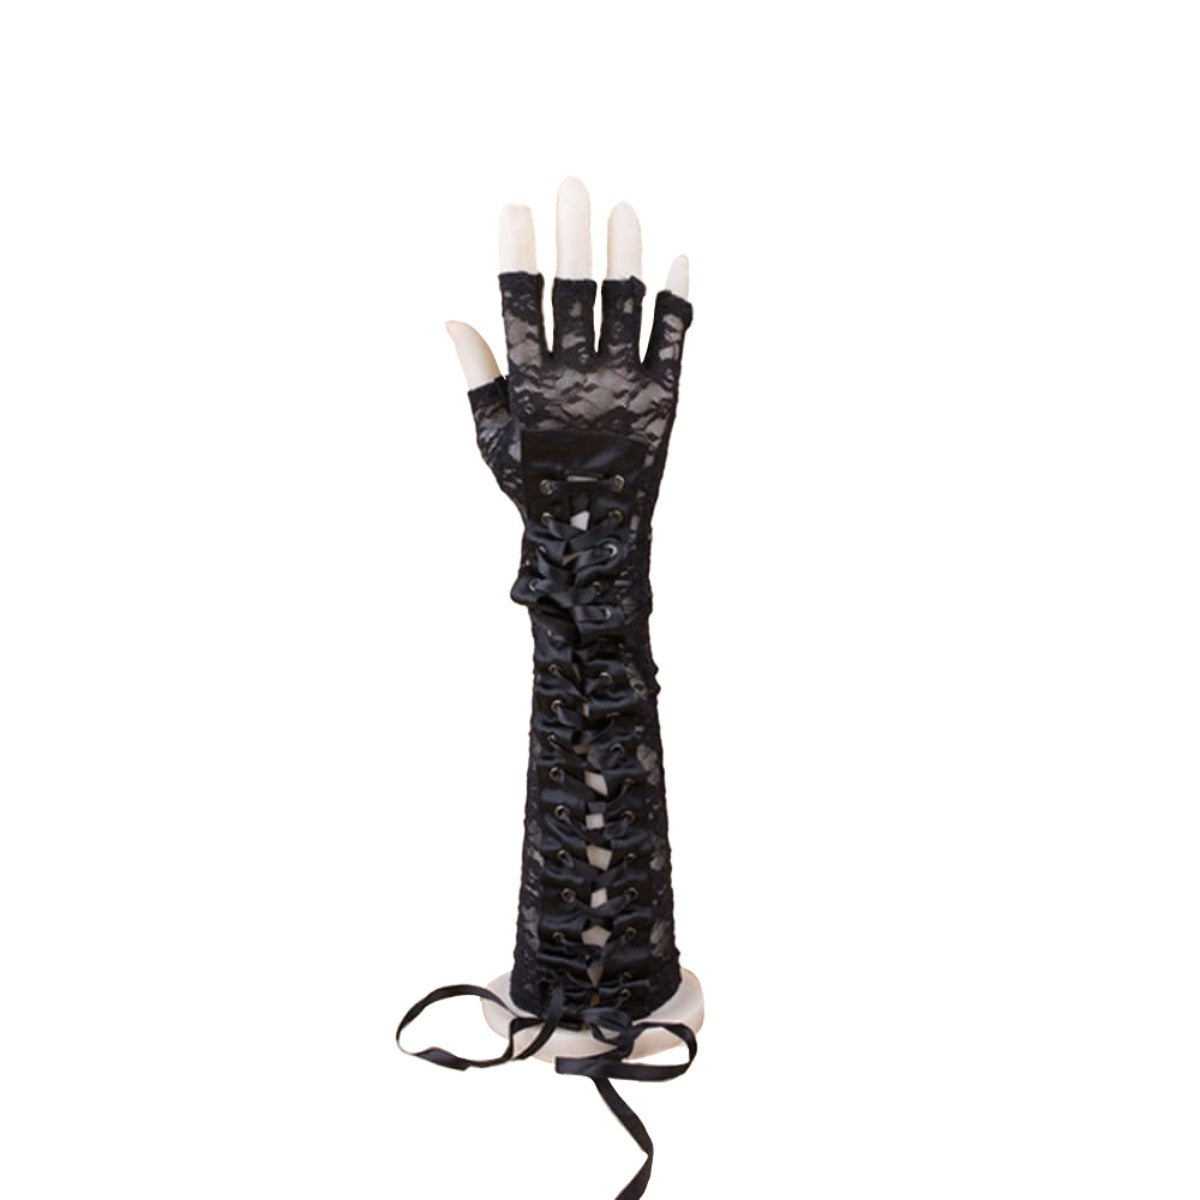 Ro Rox Half Finger Long Gloves Delicate Lace Vintage Gothic